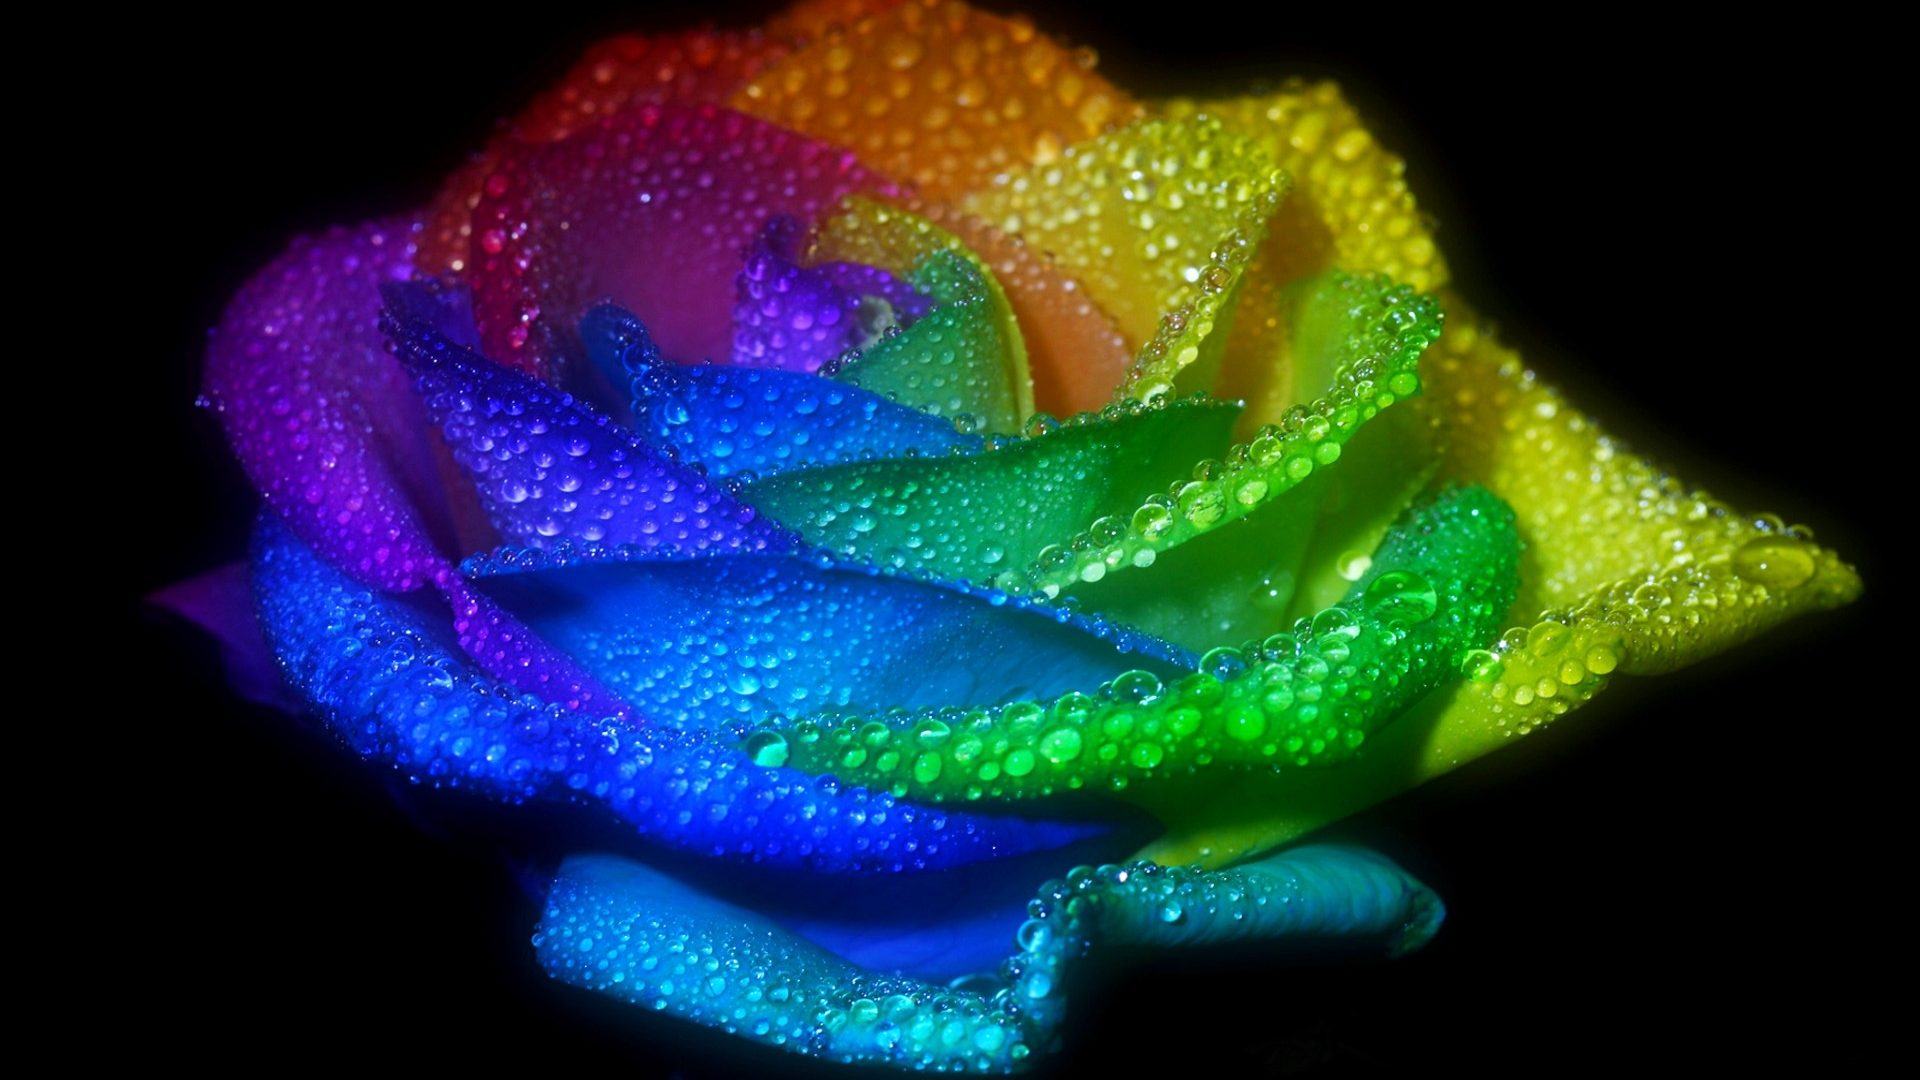 Waterdrops Rose Rainbow Nature Flower Petals Hd 4k - Rainbow Rose With Water Drops , HD Wallpaper & Backgrounds